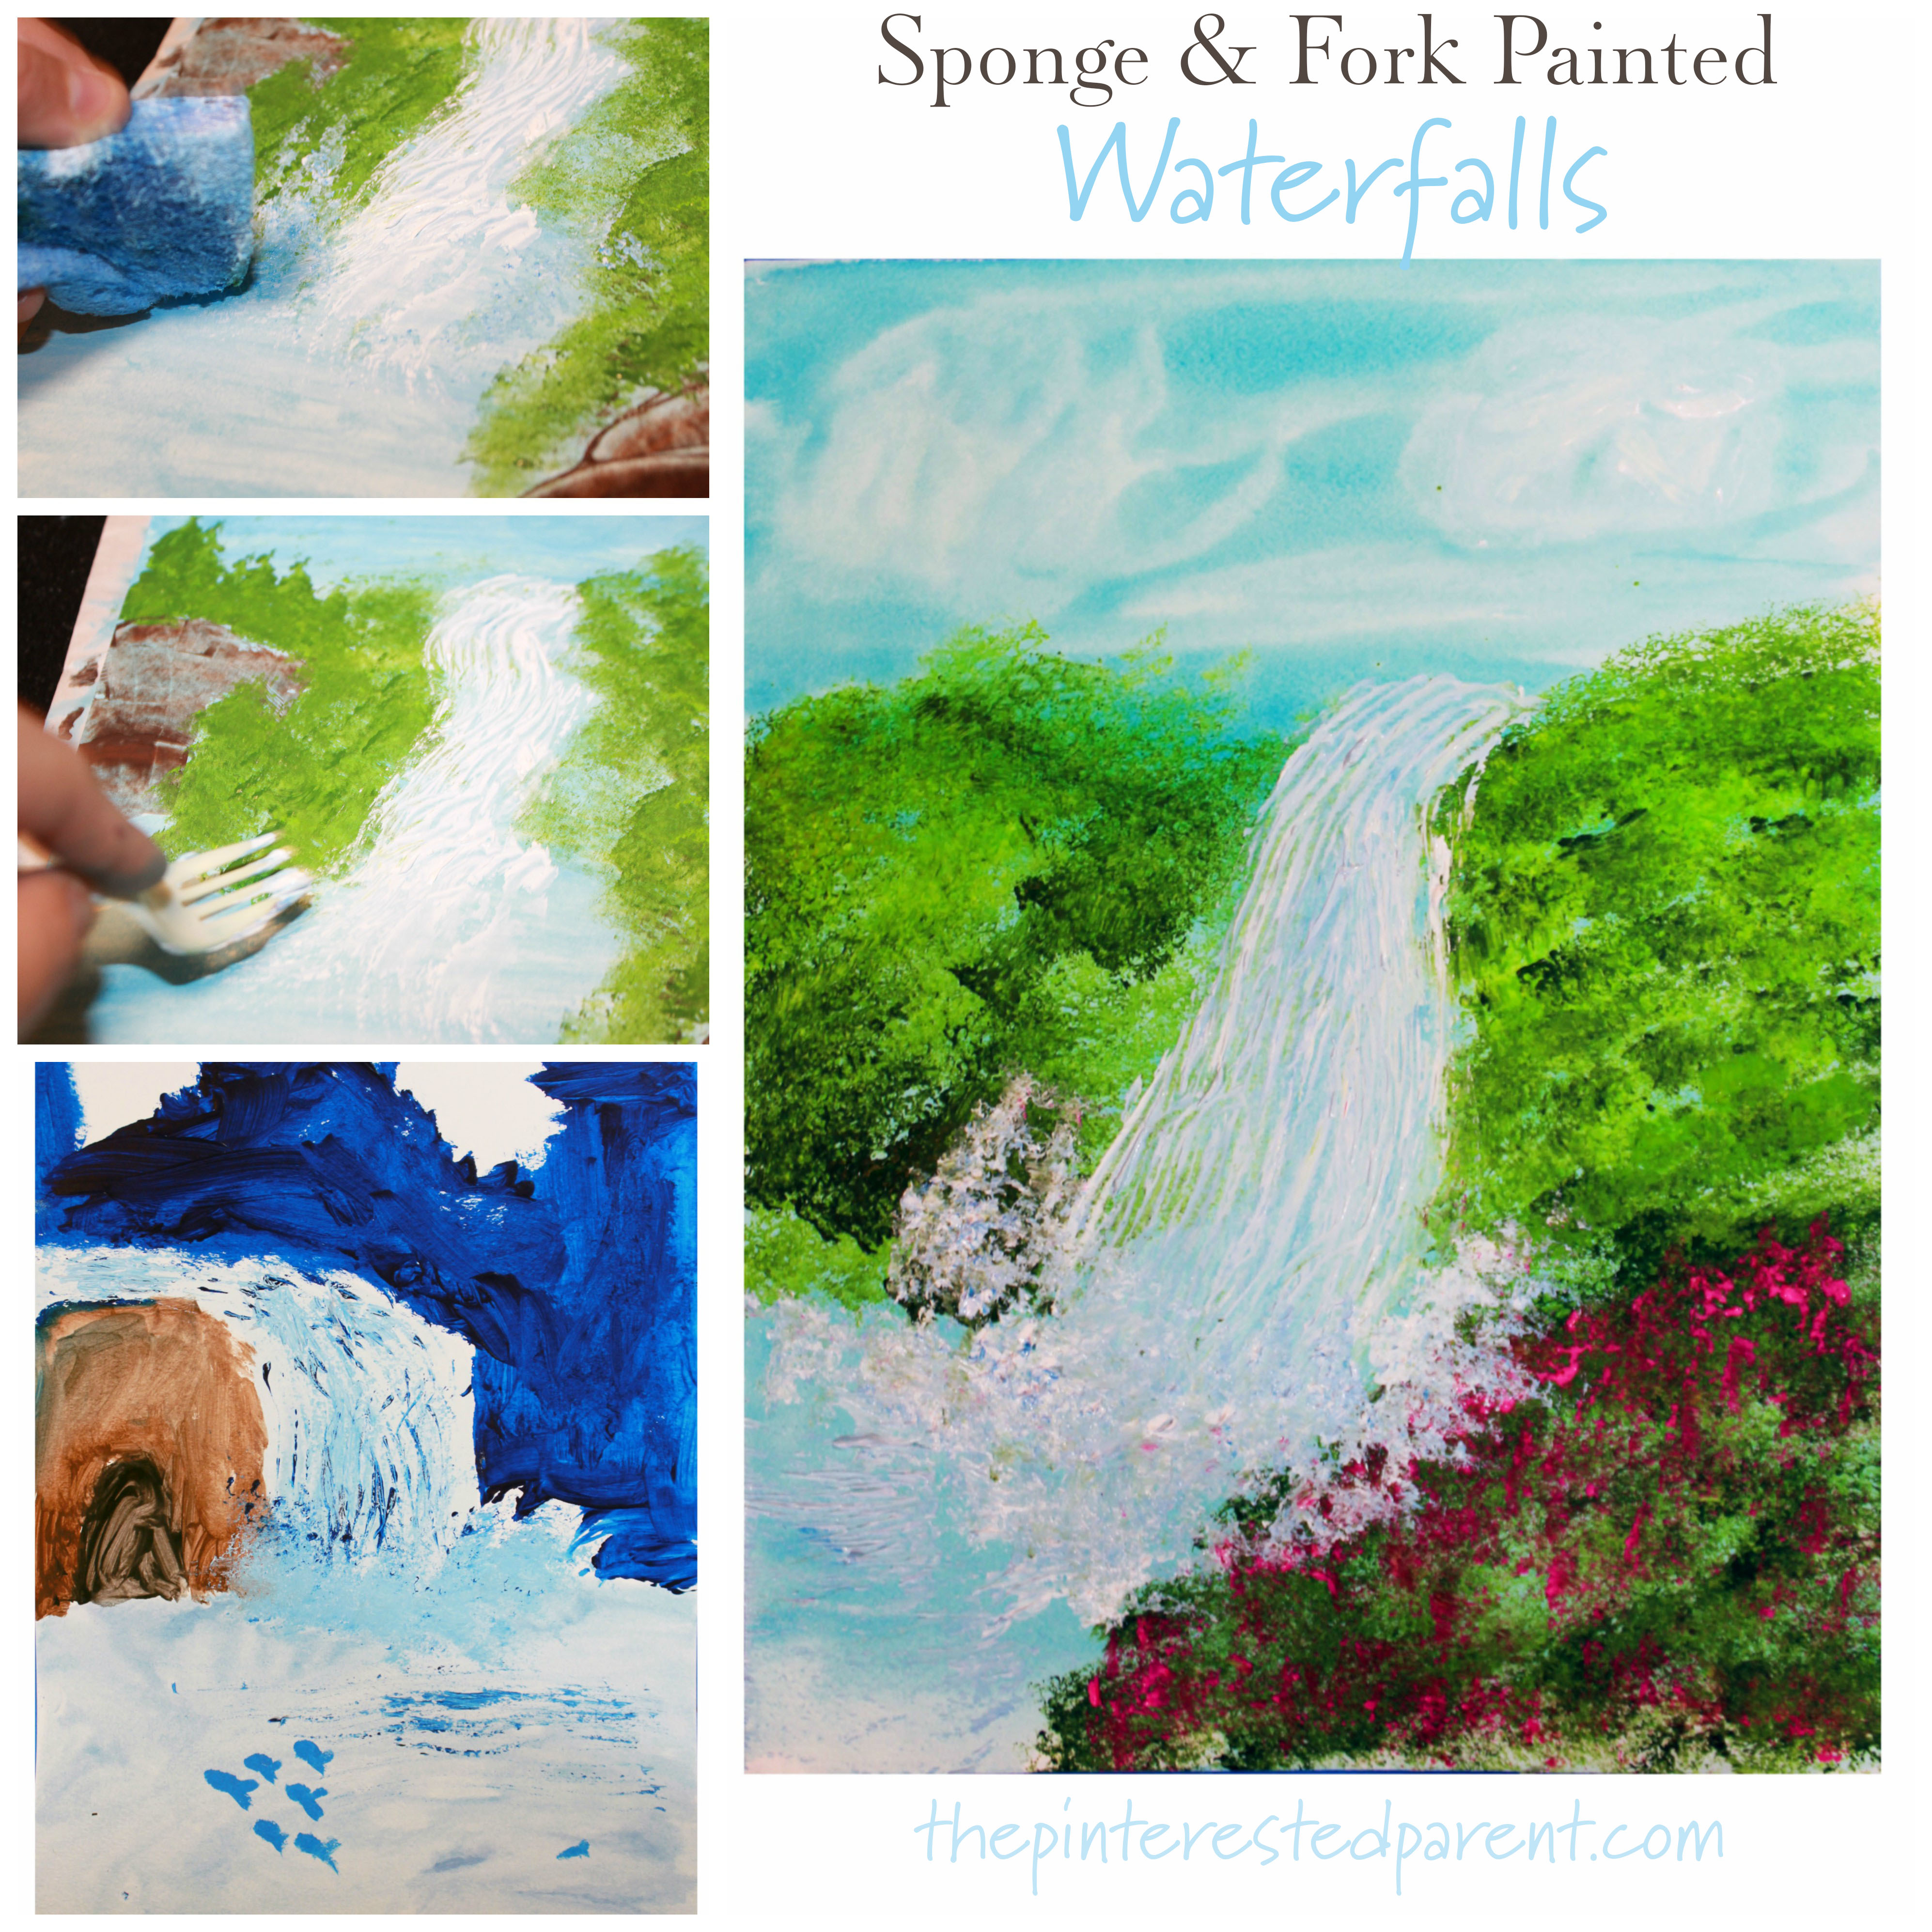 Sponge and fork painted waterfalls. This beautiful paint project is great for kids and adults. Arts and crafts